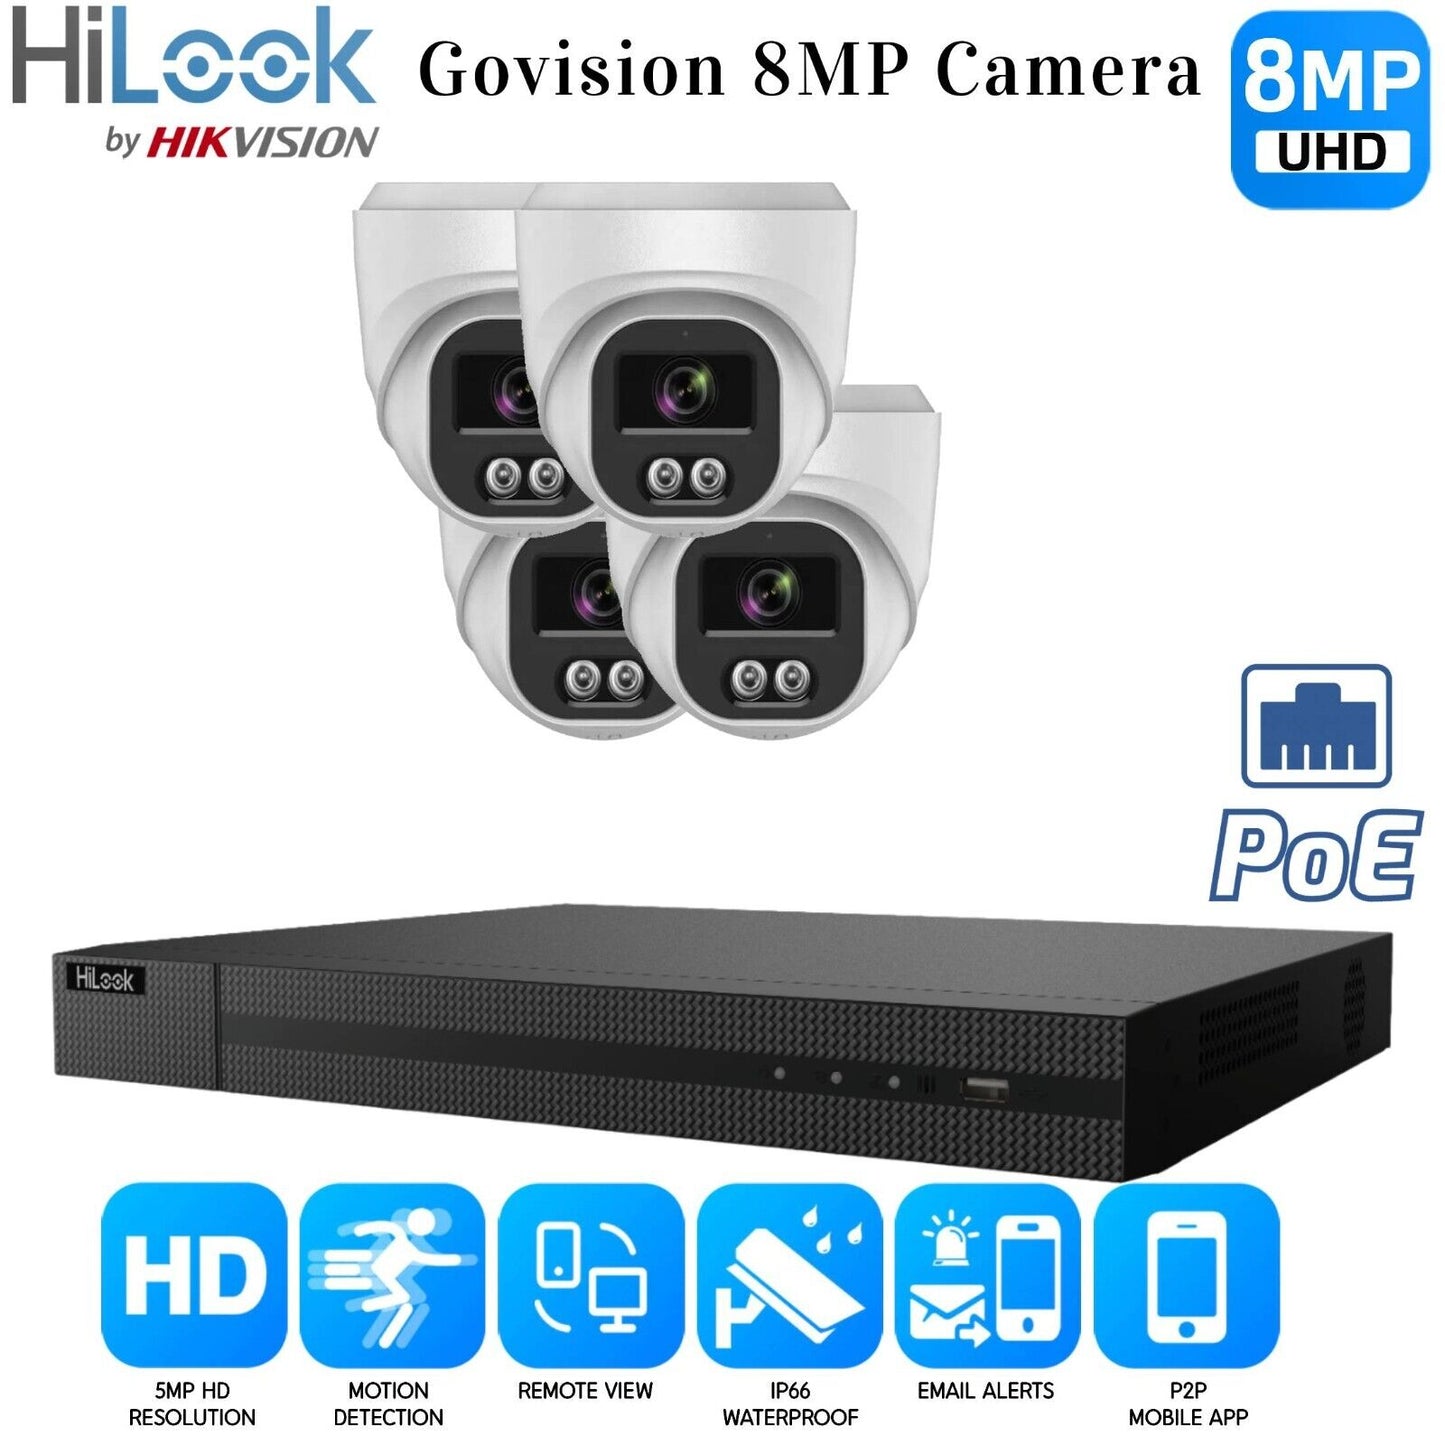 HIKVISION CCTV SYSTEM IP POE 8MP AUDIO MIC CAMERA SMART NIGHTVISION SECURITY KIT 4CH NVR 4x Cameras 2TB HDD